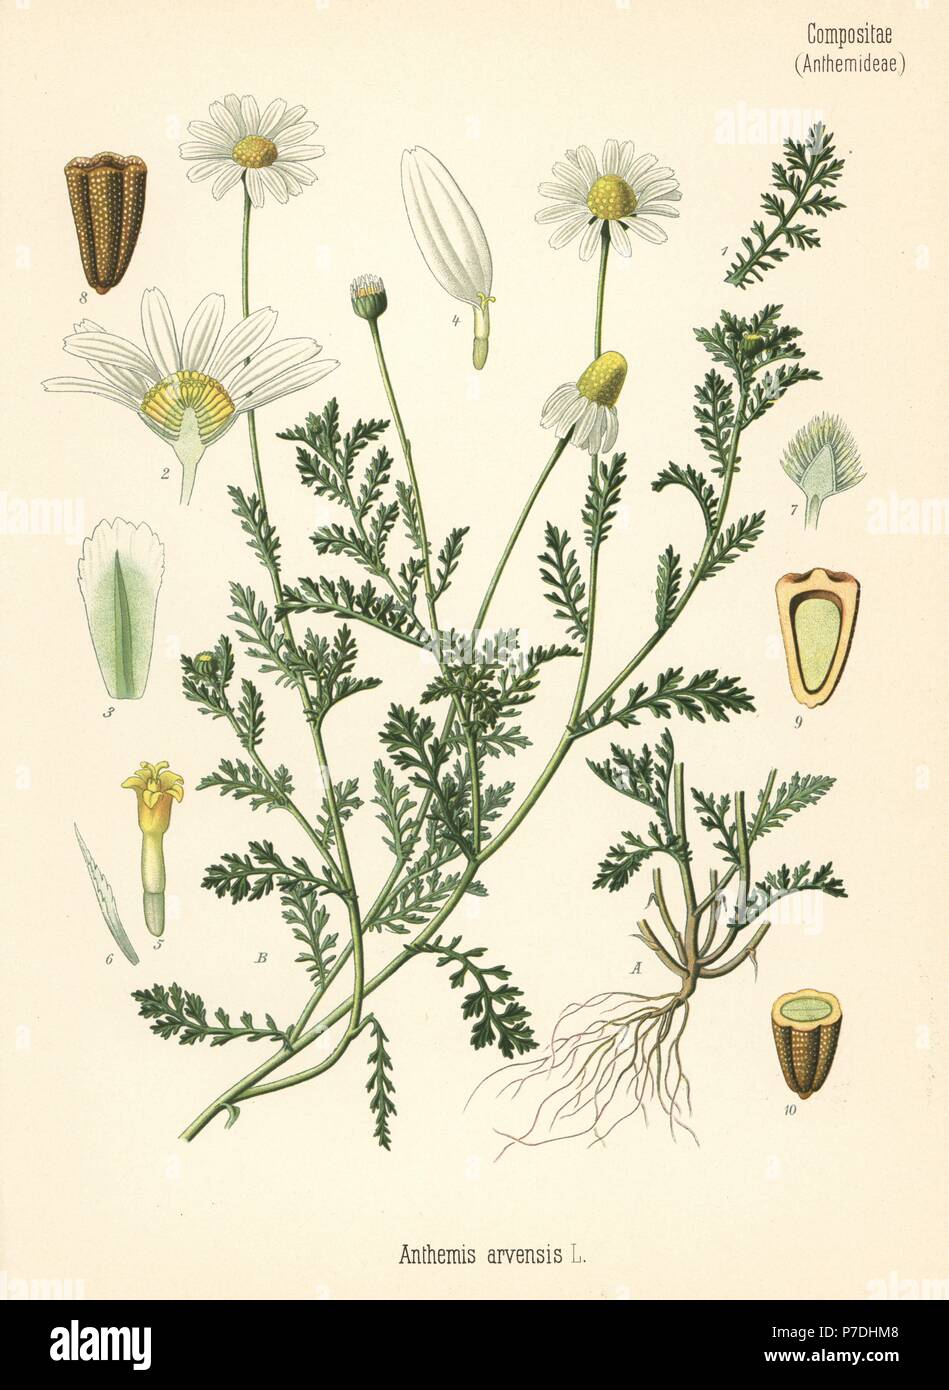 Corn chamomile or mayweed, Anthemis arvensis. Chromolithograph after a botanical illustration from Hermann Adolph Koehler's Medicinal Plants, edited by Gustav Pabst, Koehler, Germany, 1887. Stock Photo